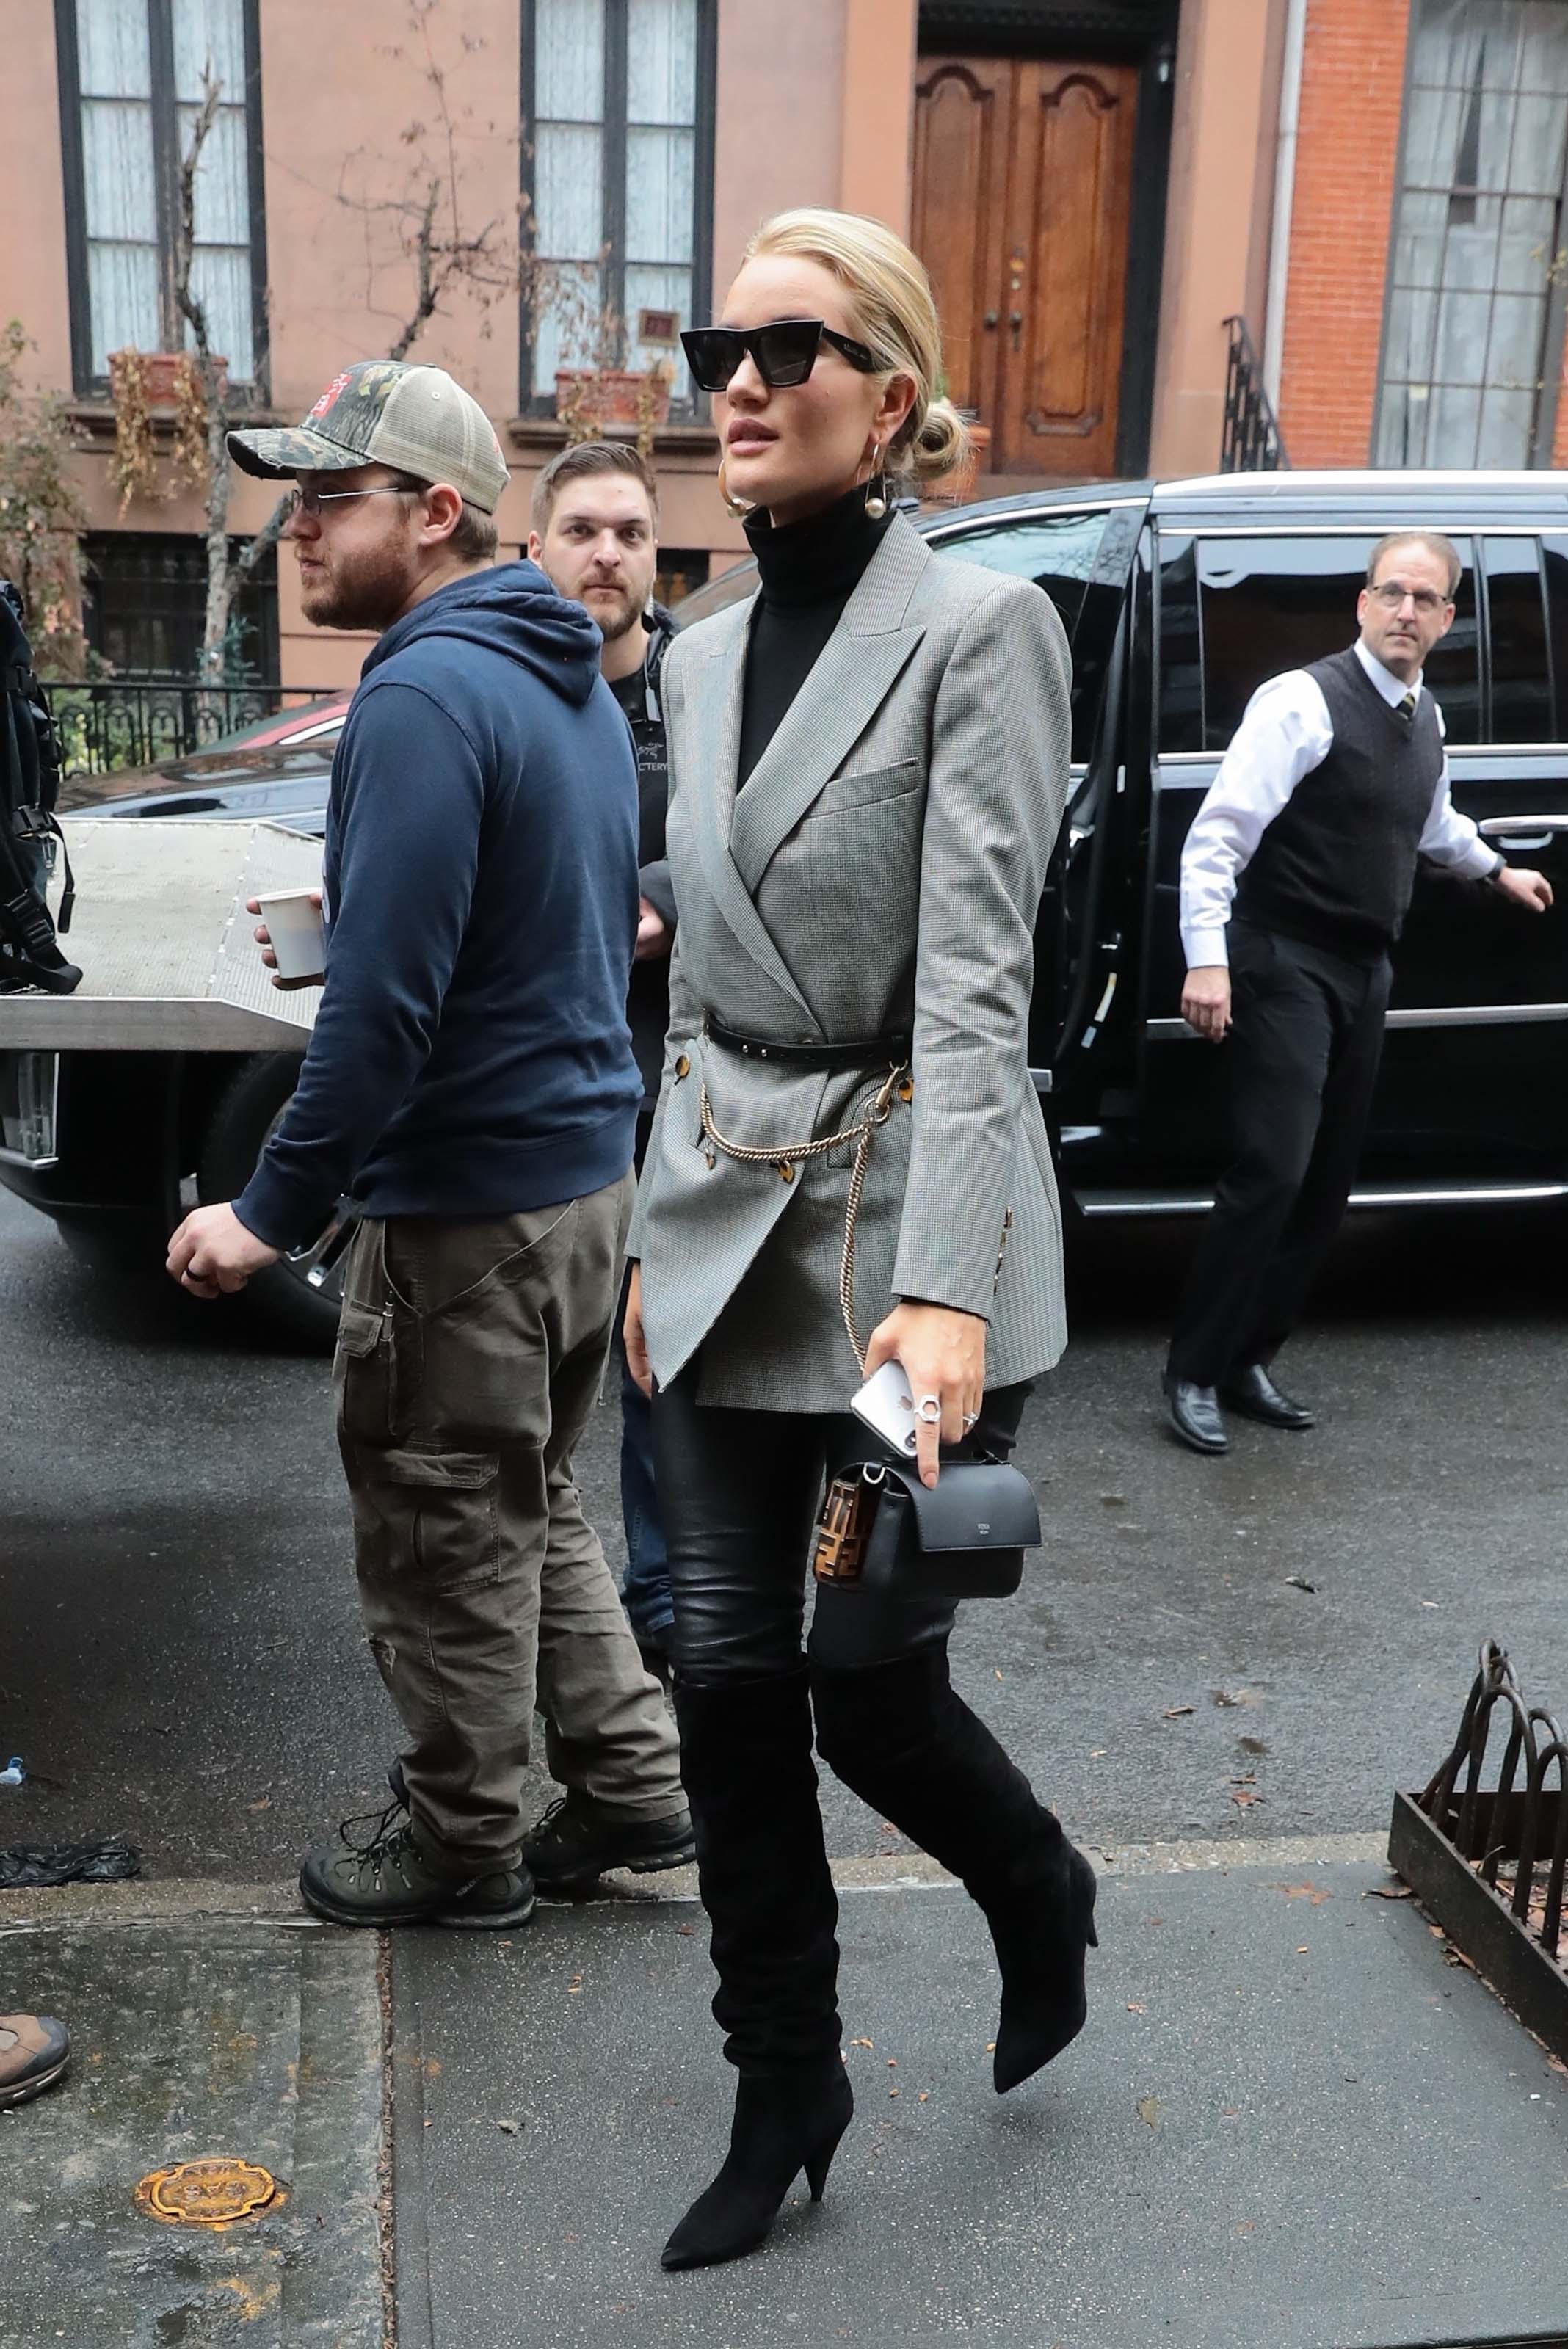 Rosie Huntington-Whiteley shows off her high fashion look